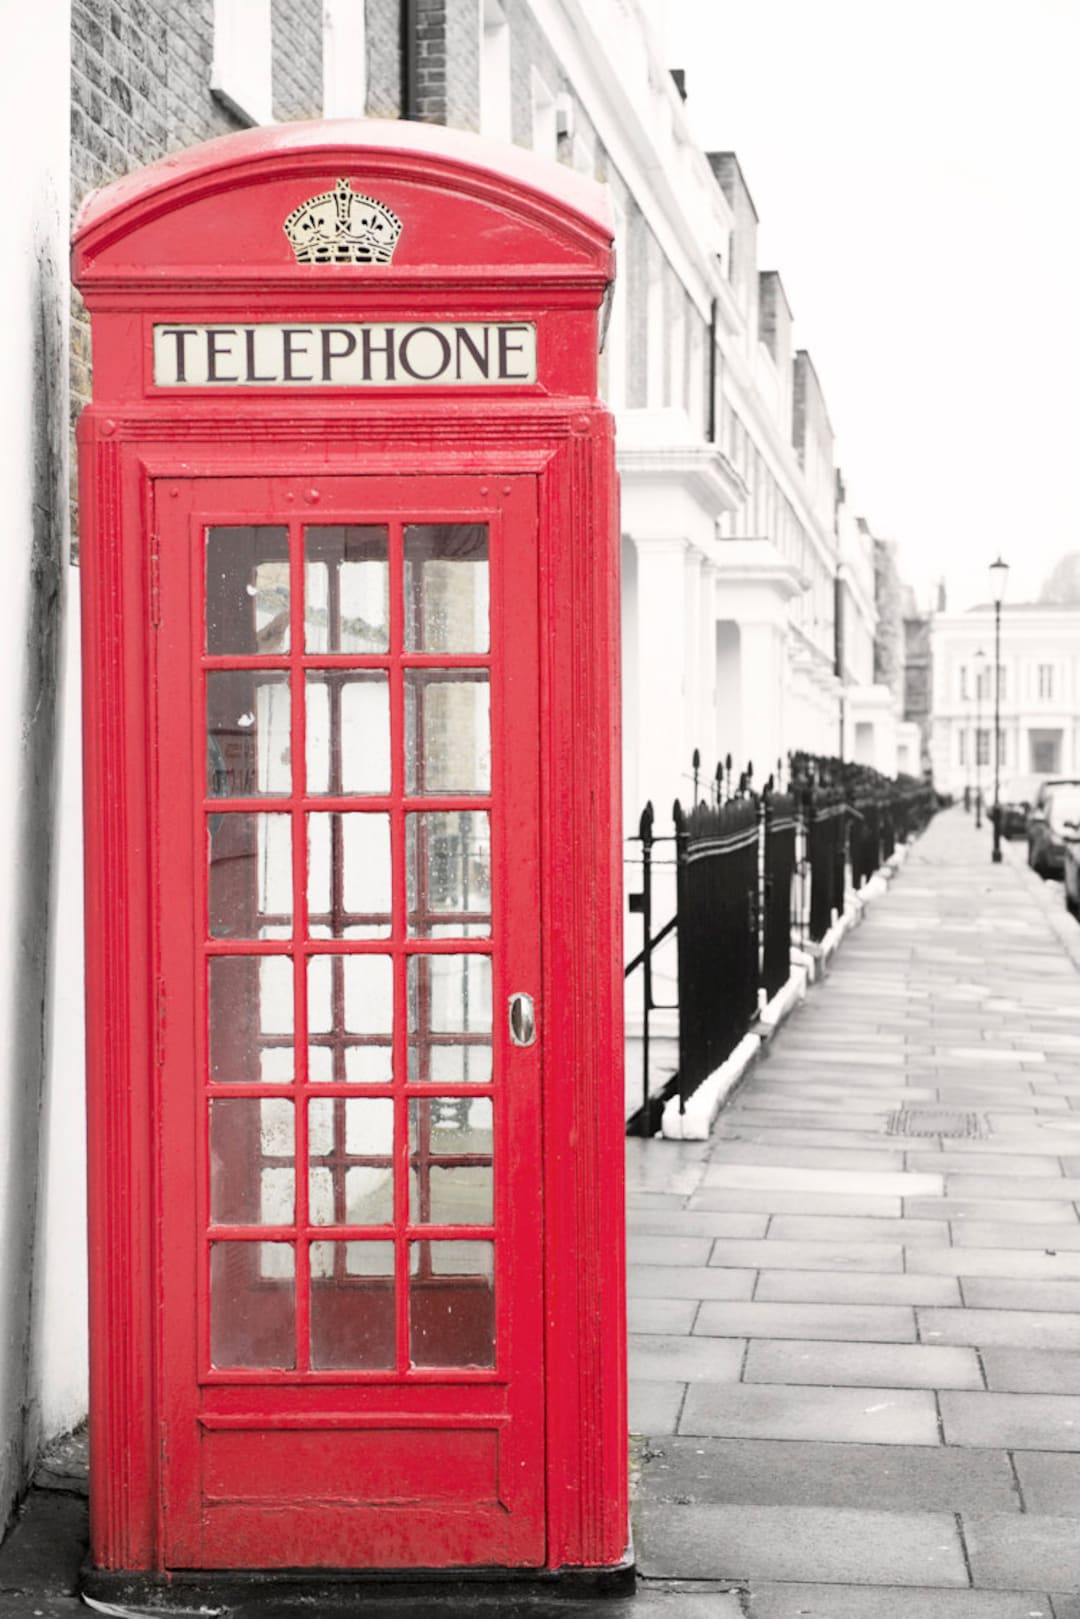 Phone Booth Design Ideas and Inspiration